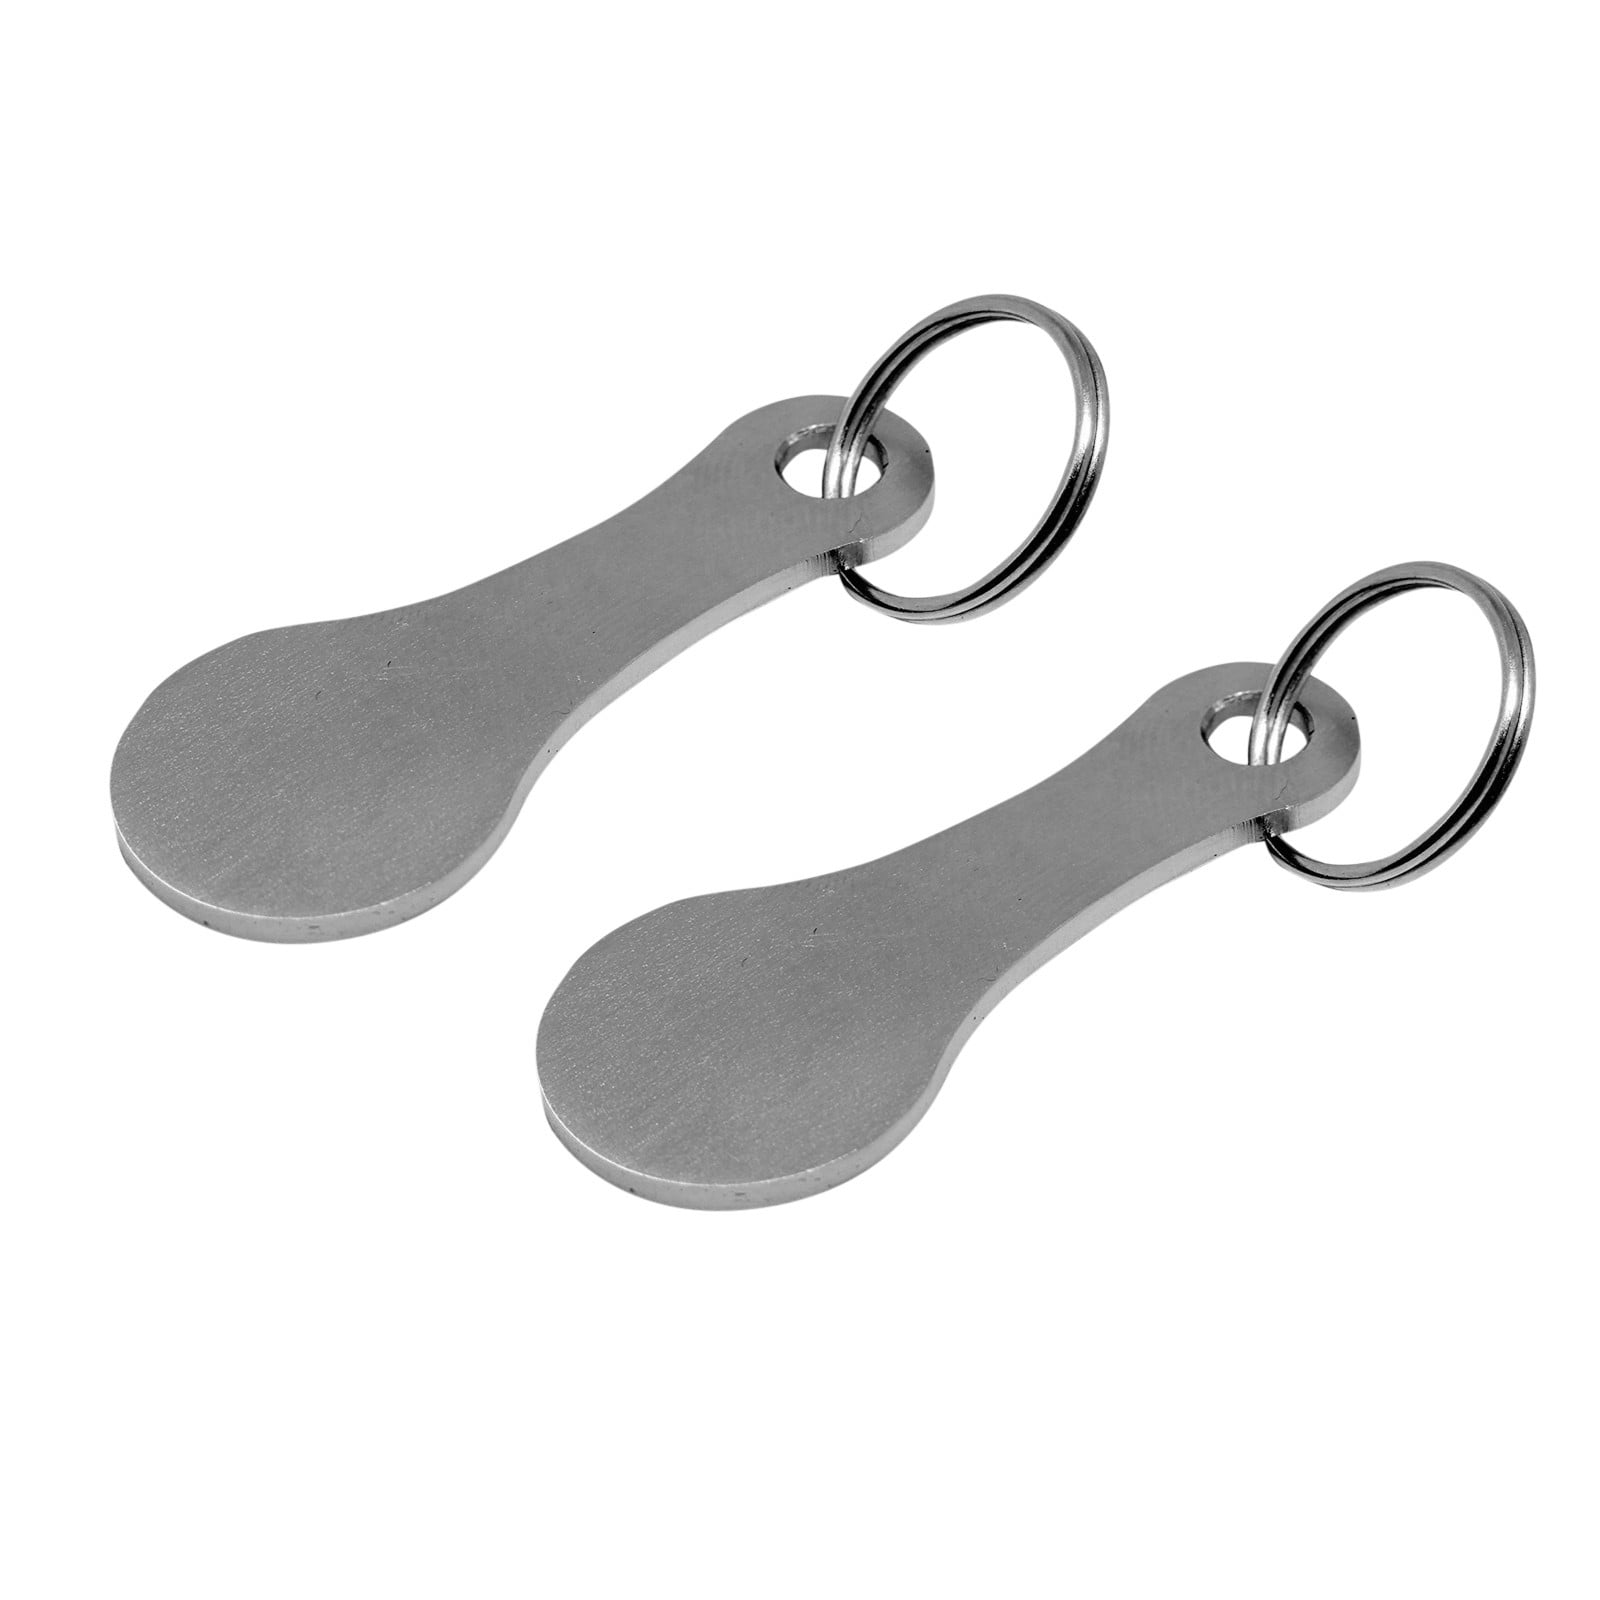 Change or Grocery Shopping Cart Stainless Steel Shopping Trolley Token Coin Keyring Keychain Trolley Unlock Release Key for Meters 2pcs Shopping Trolley Tokens Key Ring